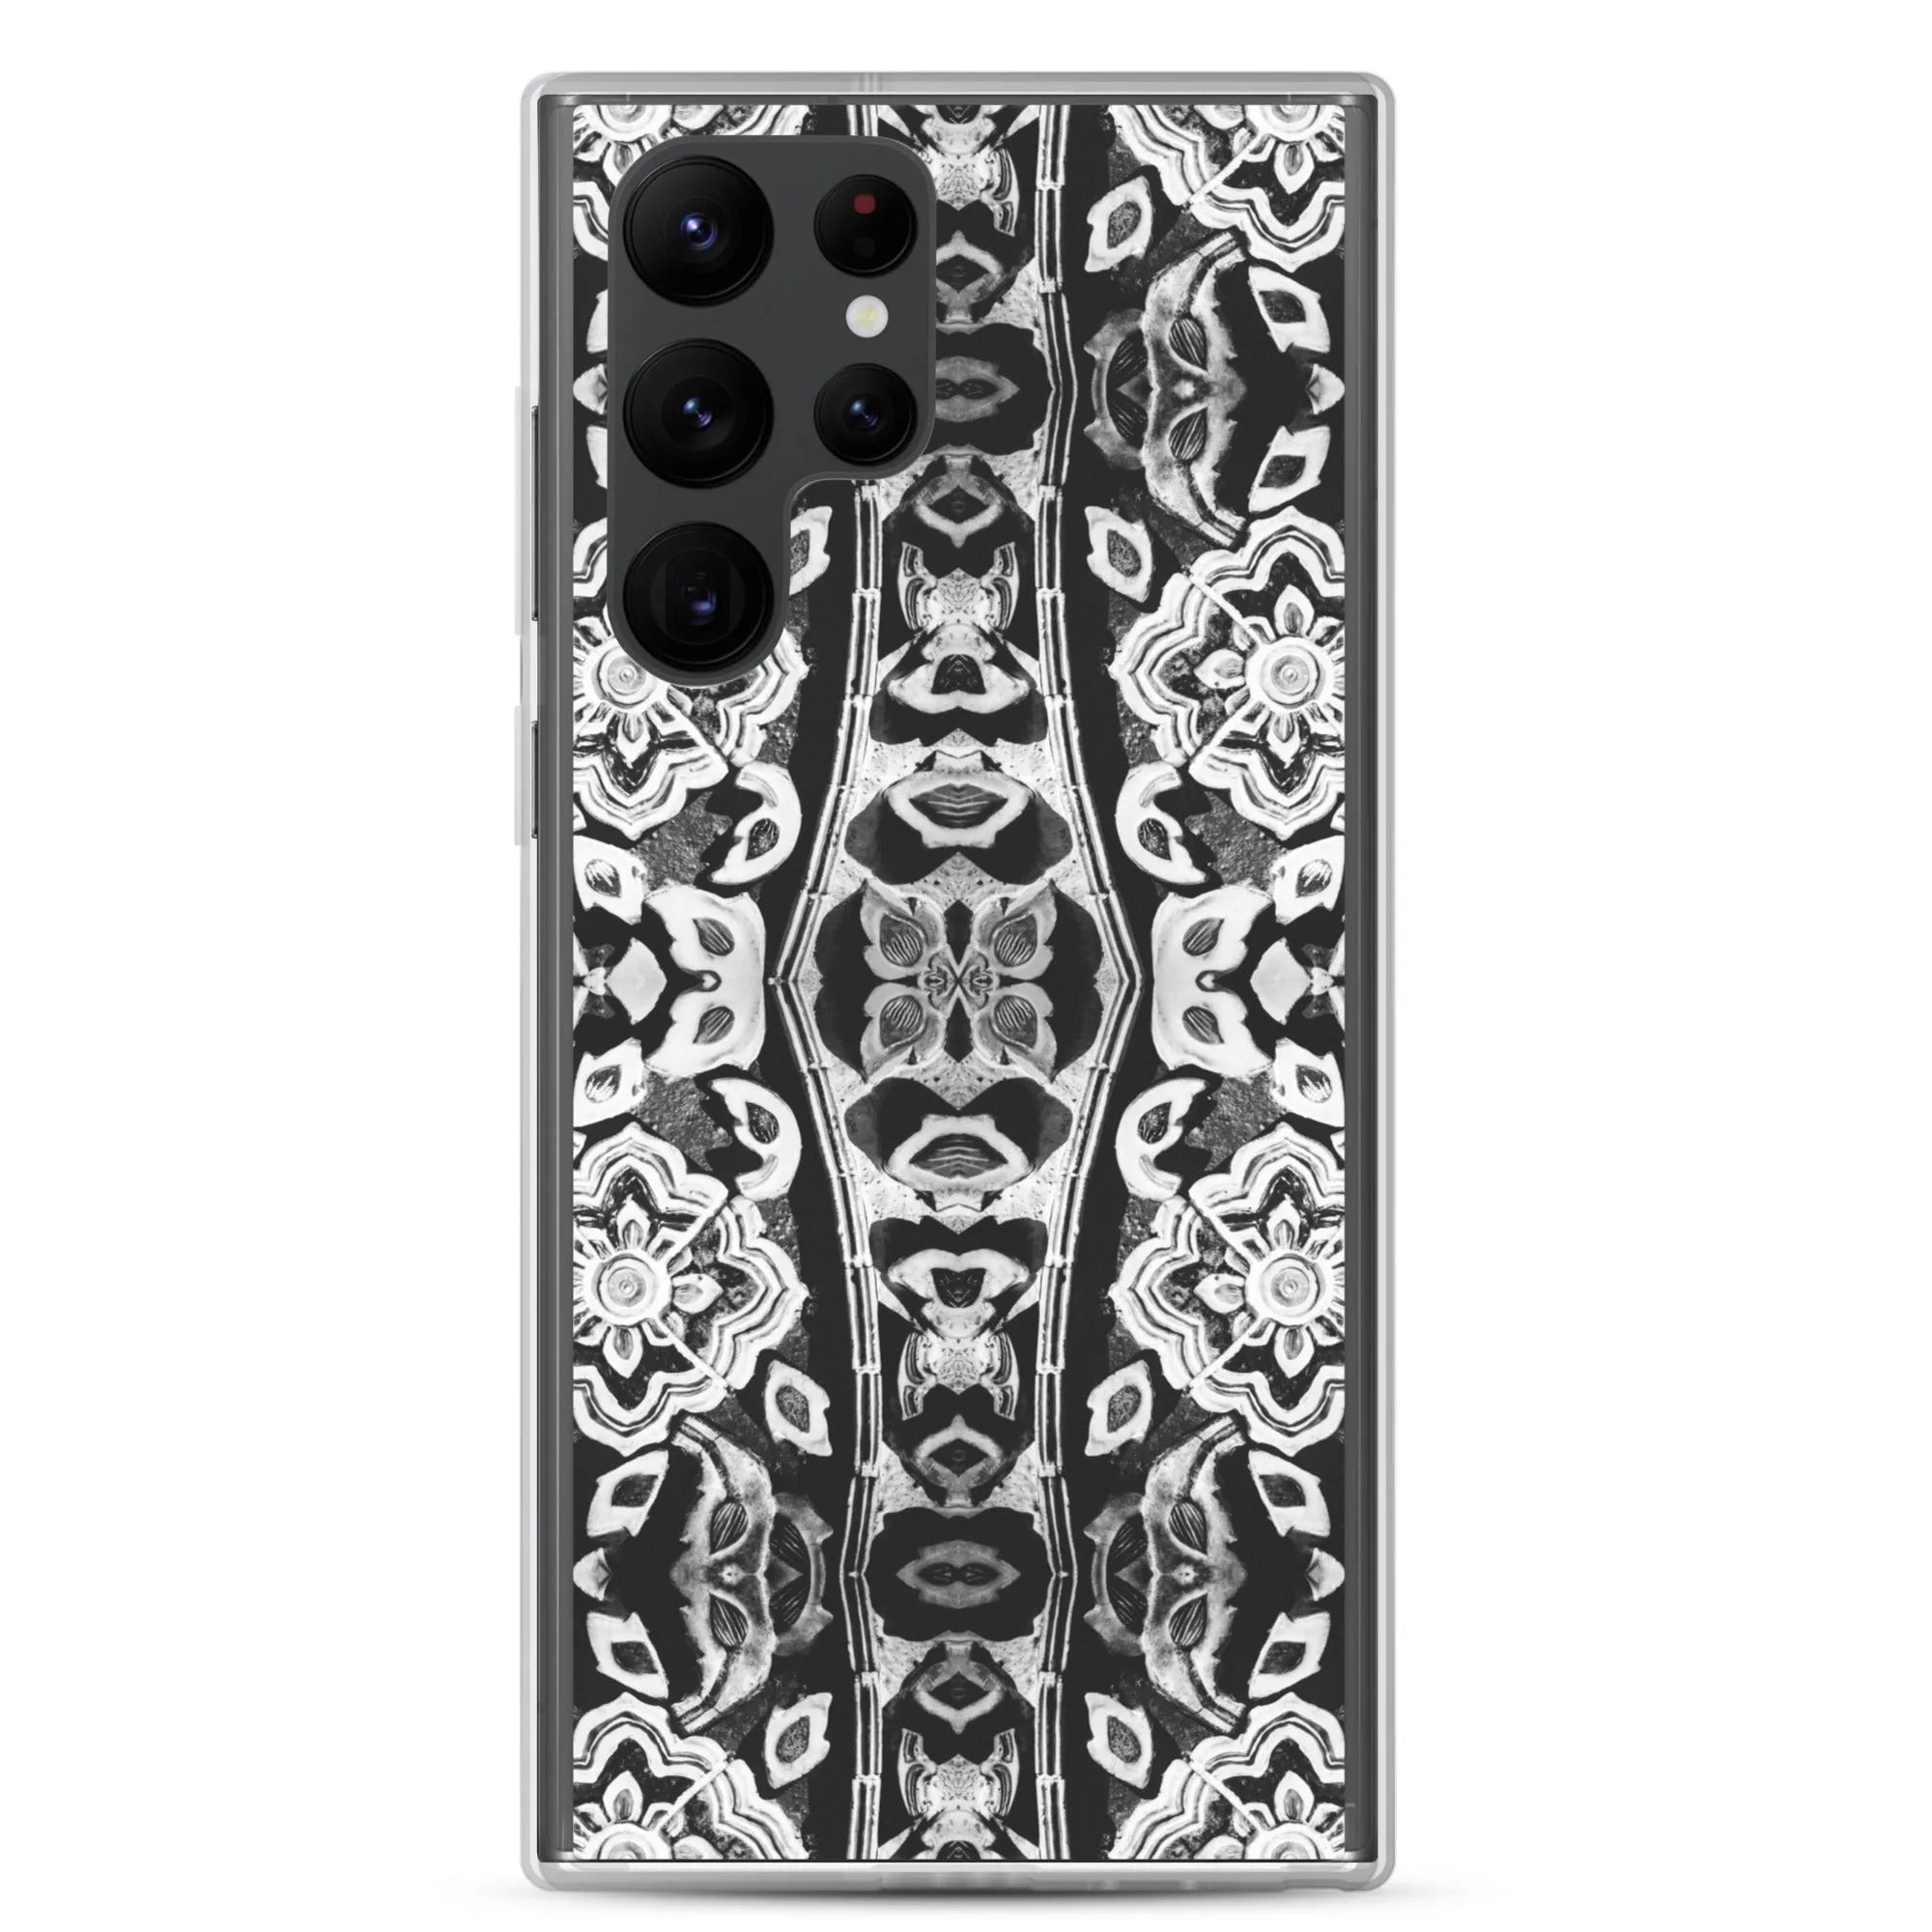 Masala Thai Samsung Galaxy Case - Black And White - Samsung Galaxy S22 Ultra - Mobile Phone Cases - Aesthetic Art